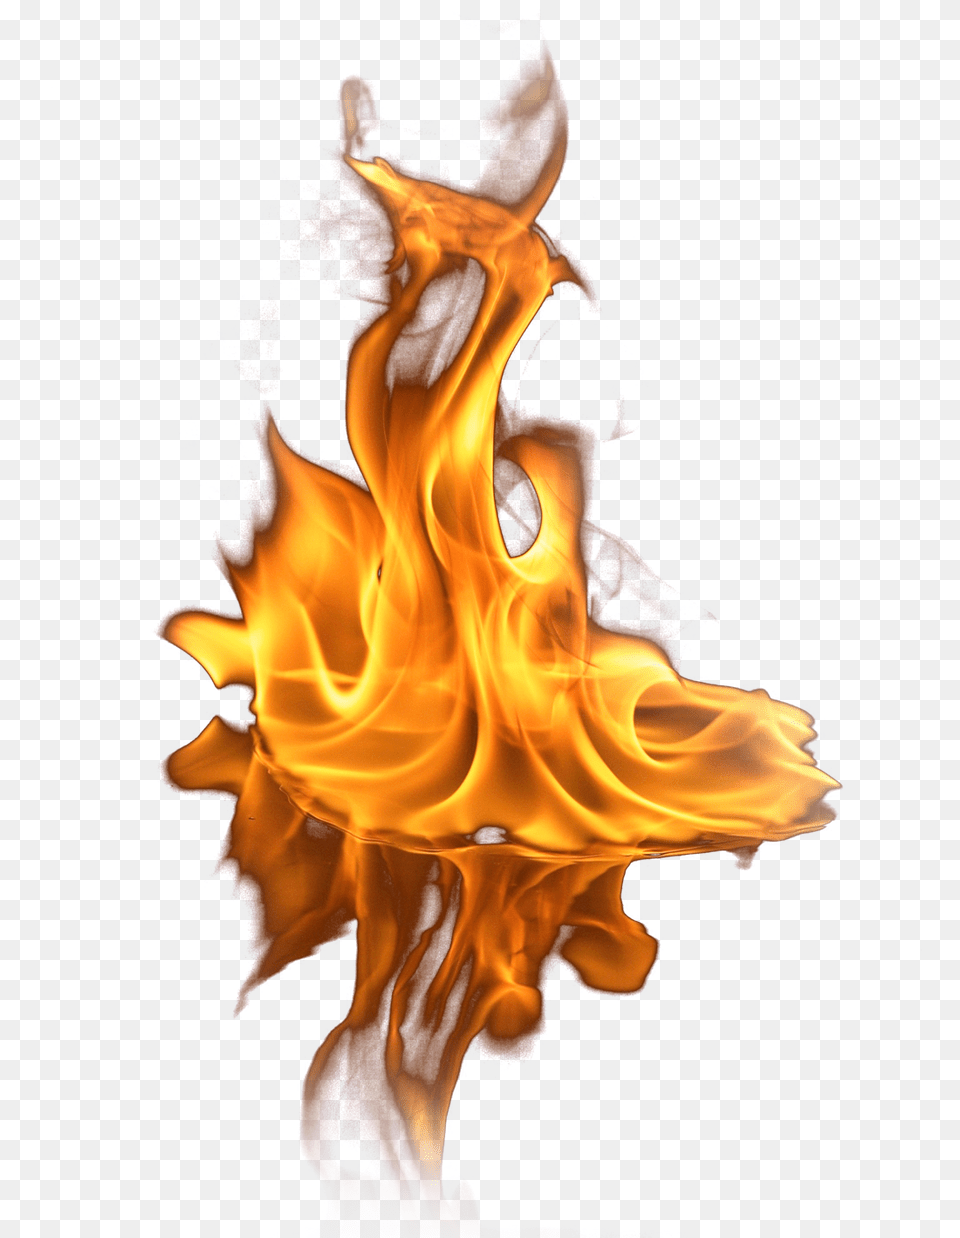 Pngpix Com Fire Flame Image, Adult, Female, Person, Woman Png